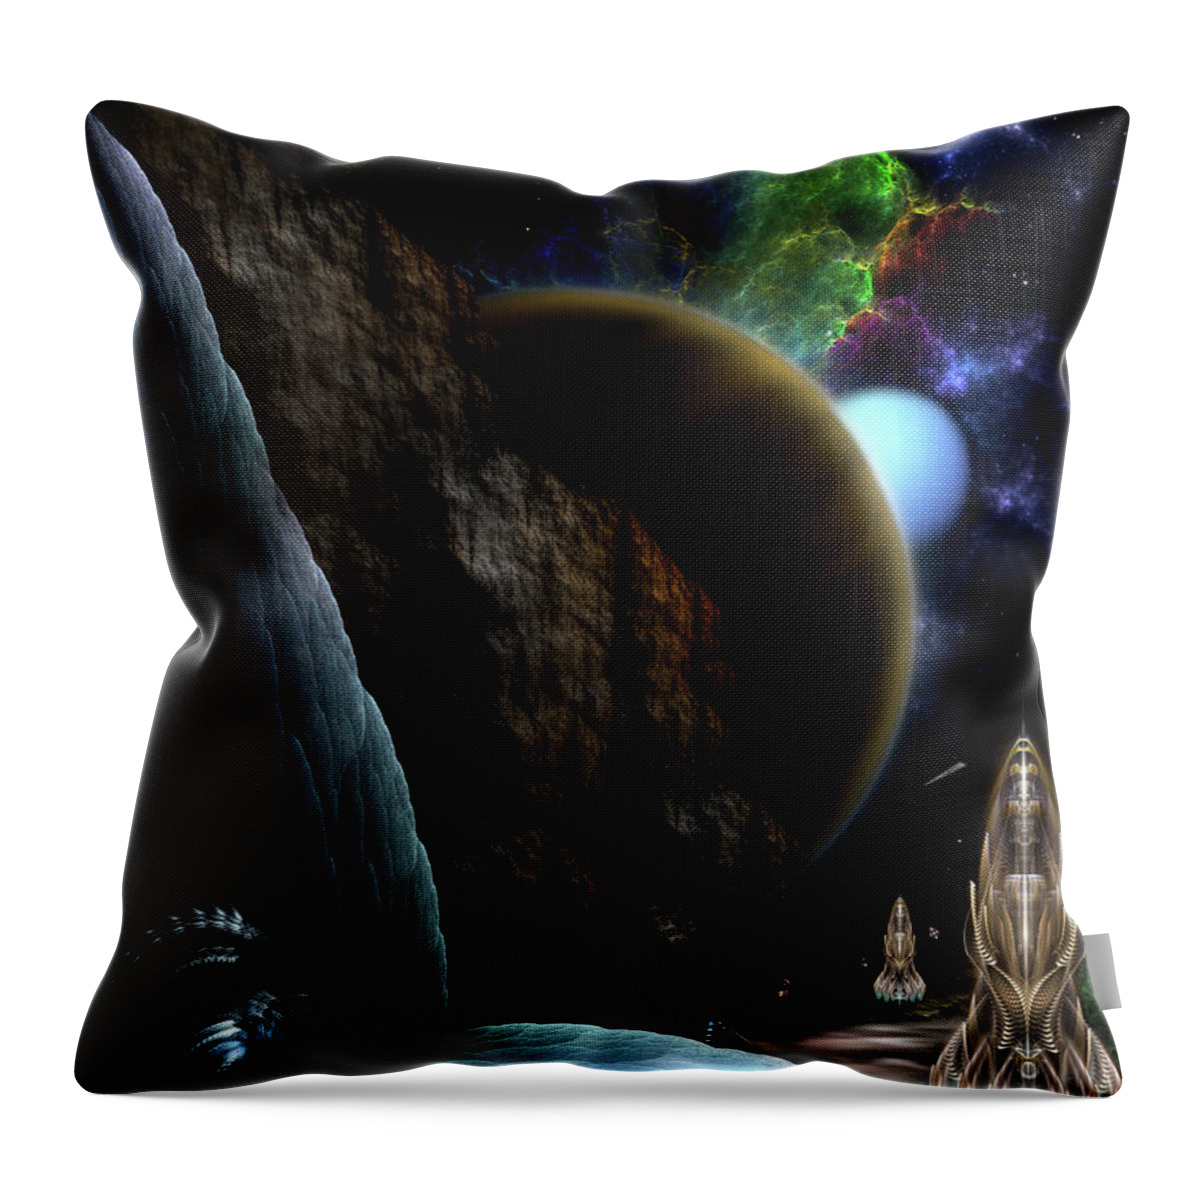 Exploration Of Space Throw Pillow featuring the digital art Exploration Of Space by Rolando Burbon